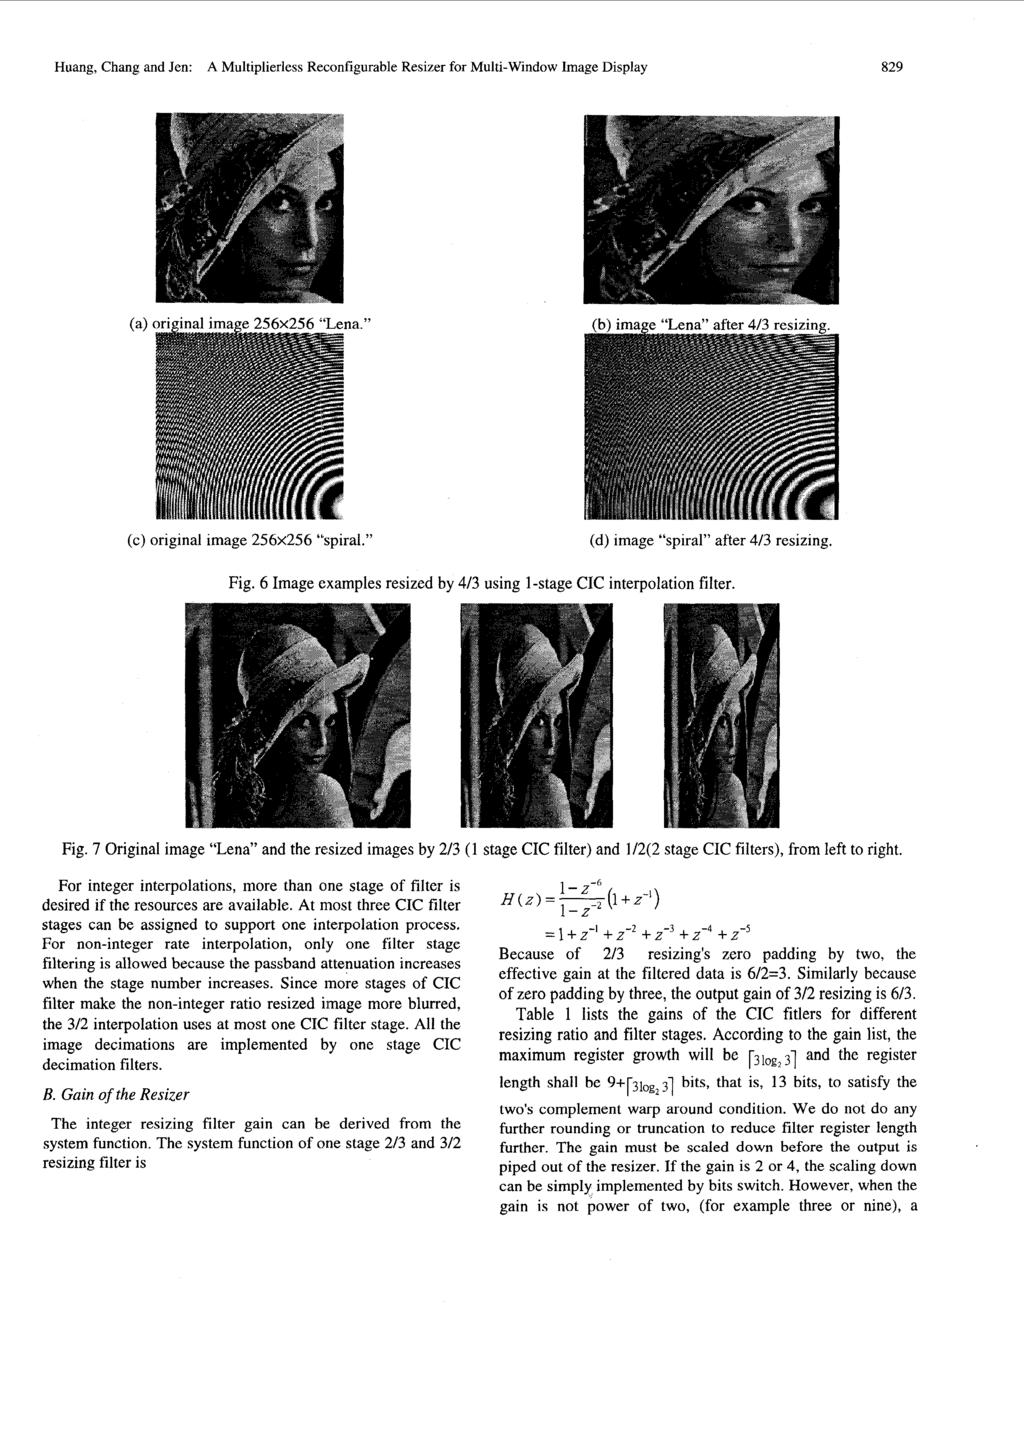 Huang, Chang and Jen: A Multiplierless Reconfigurable Resizer for Multi-Window Image Display 829 (c) original image 256x256 spiral. (d) image spiral after 4/3 resizing. Fig.